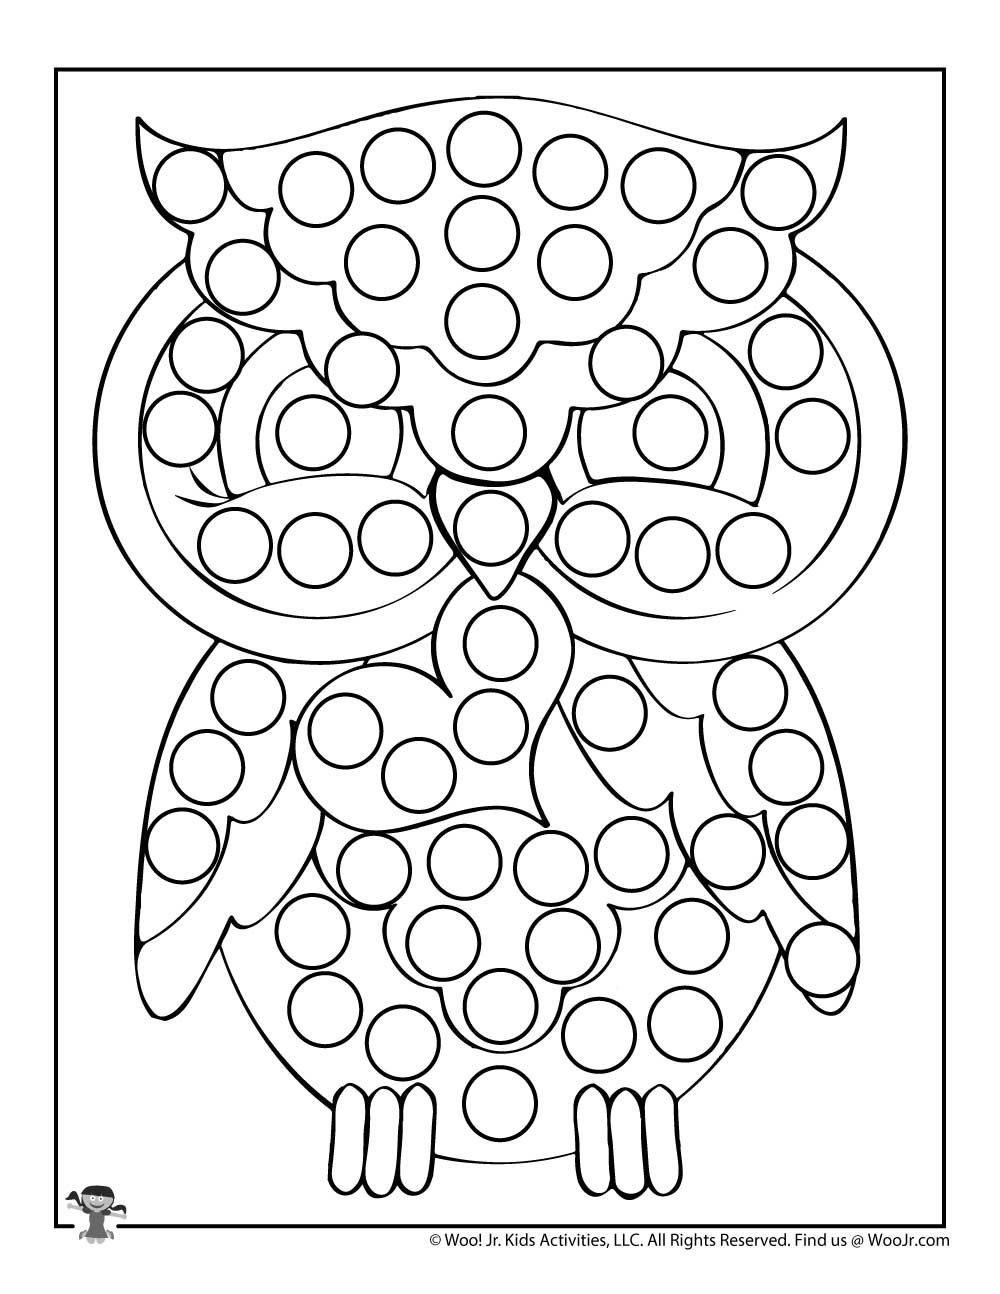 Owl Do a Dot Printable Coloring Page for Kids | Woo! Jr. Kids Activities :  Children's Publishing